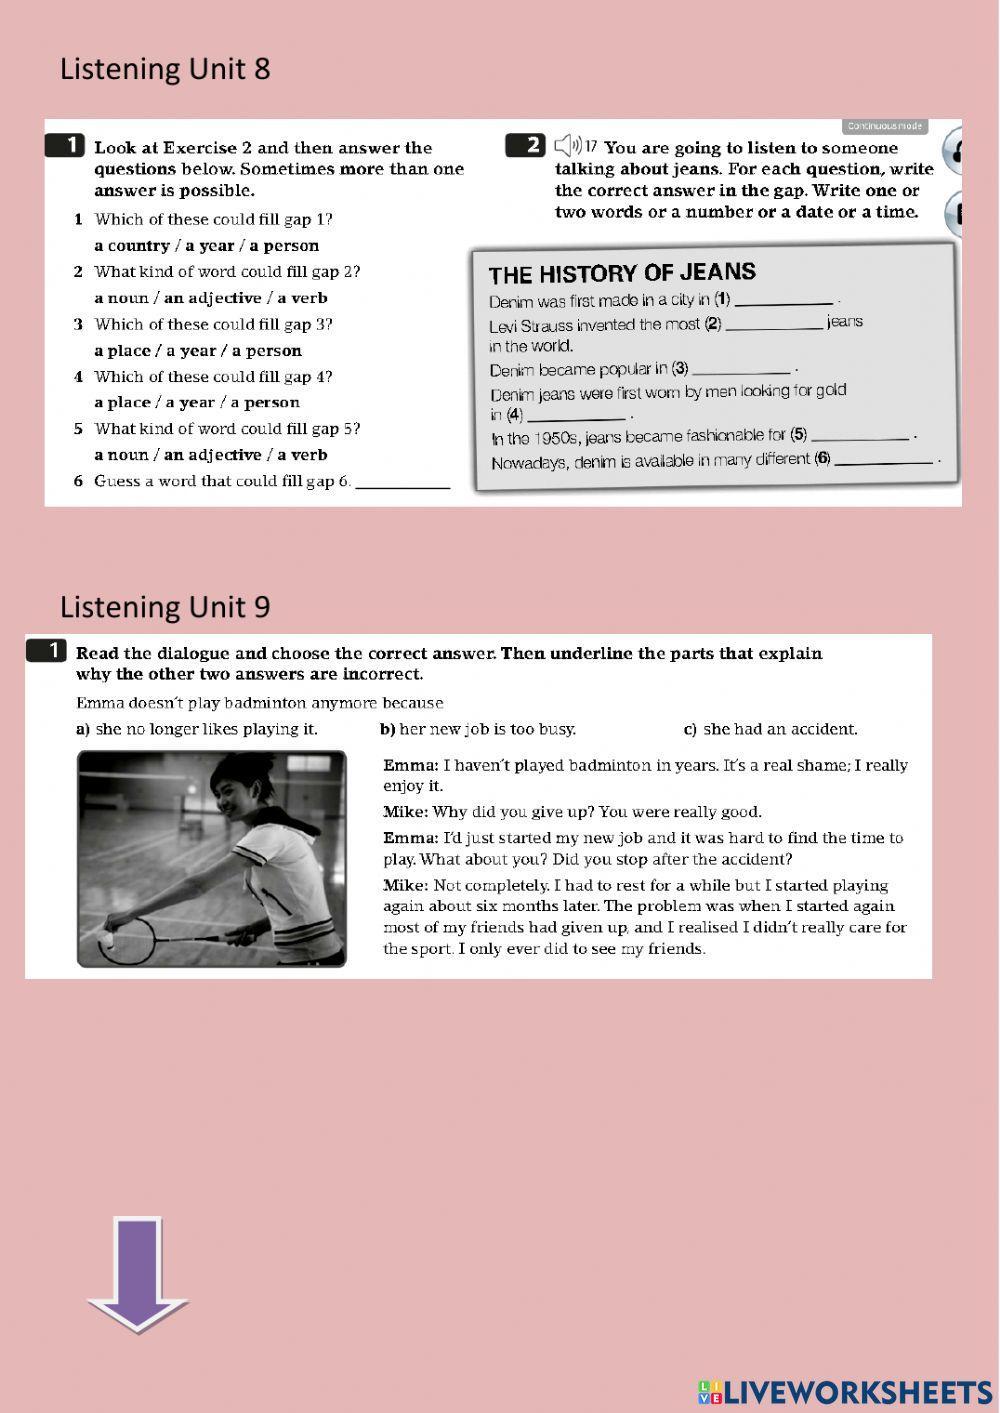 Listening Units 8 and 9